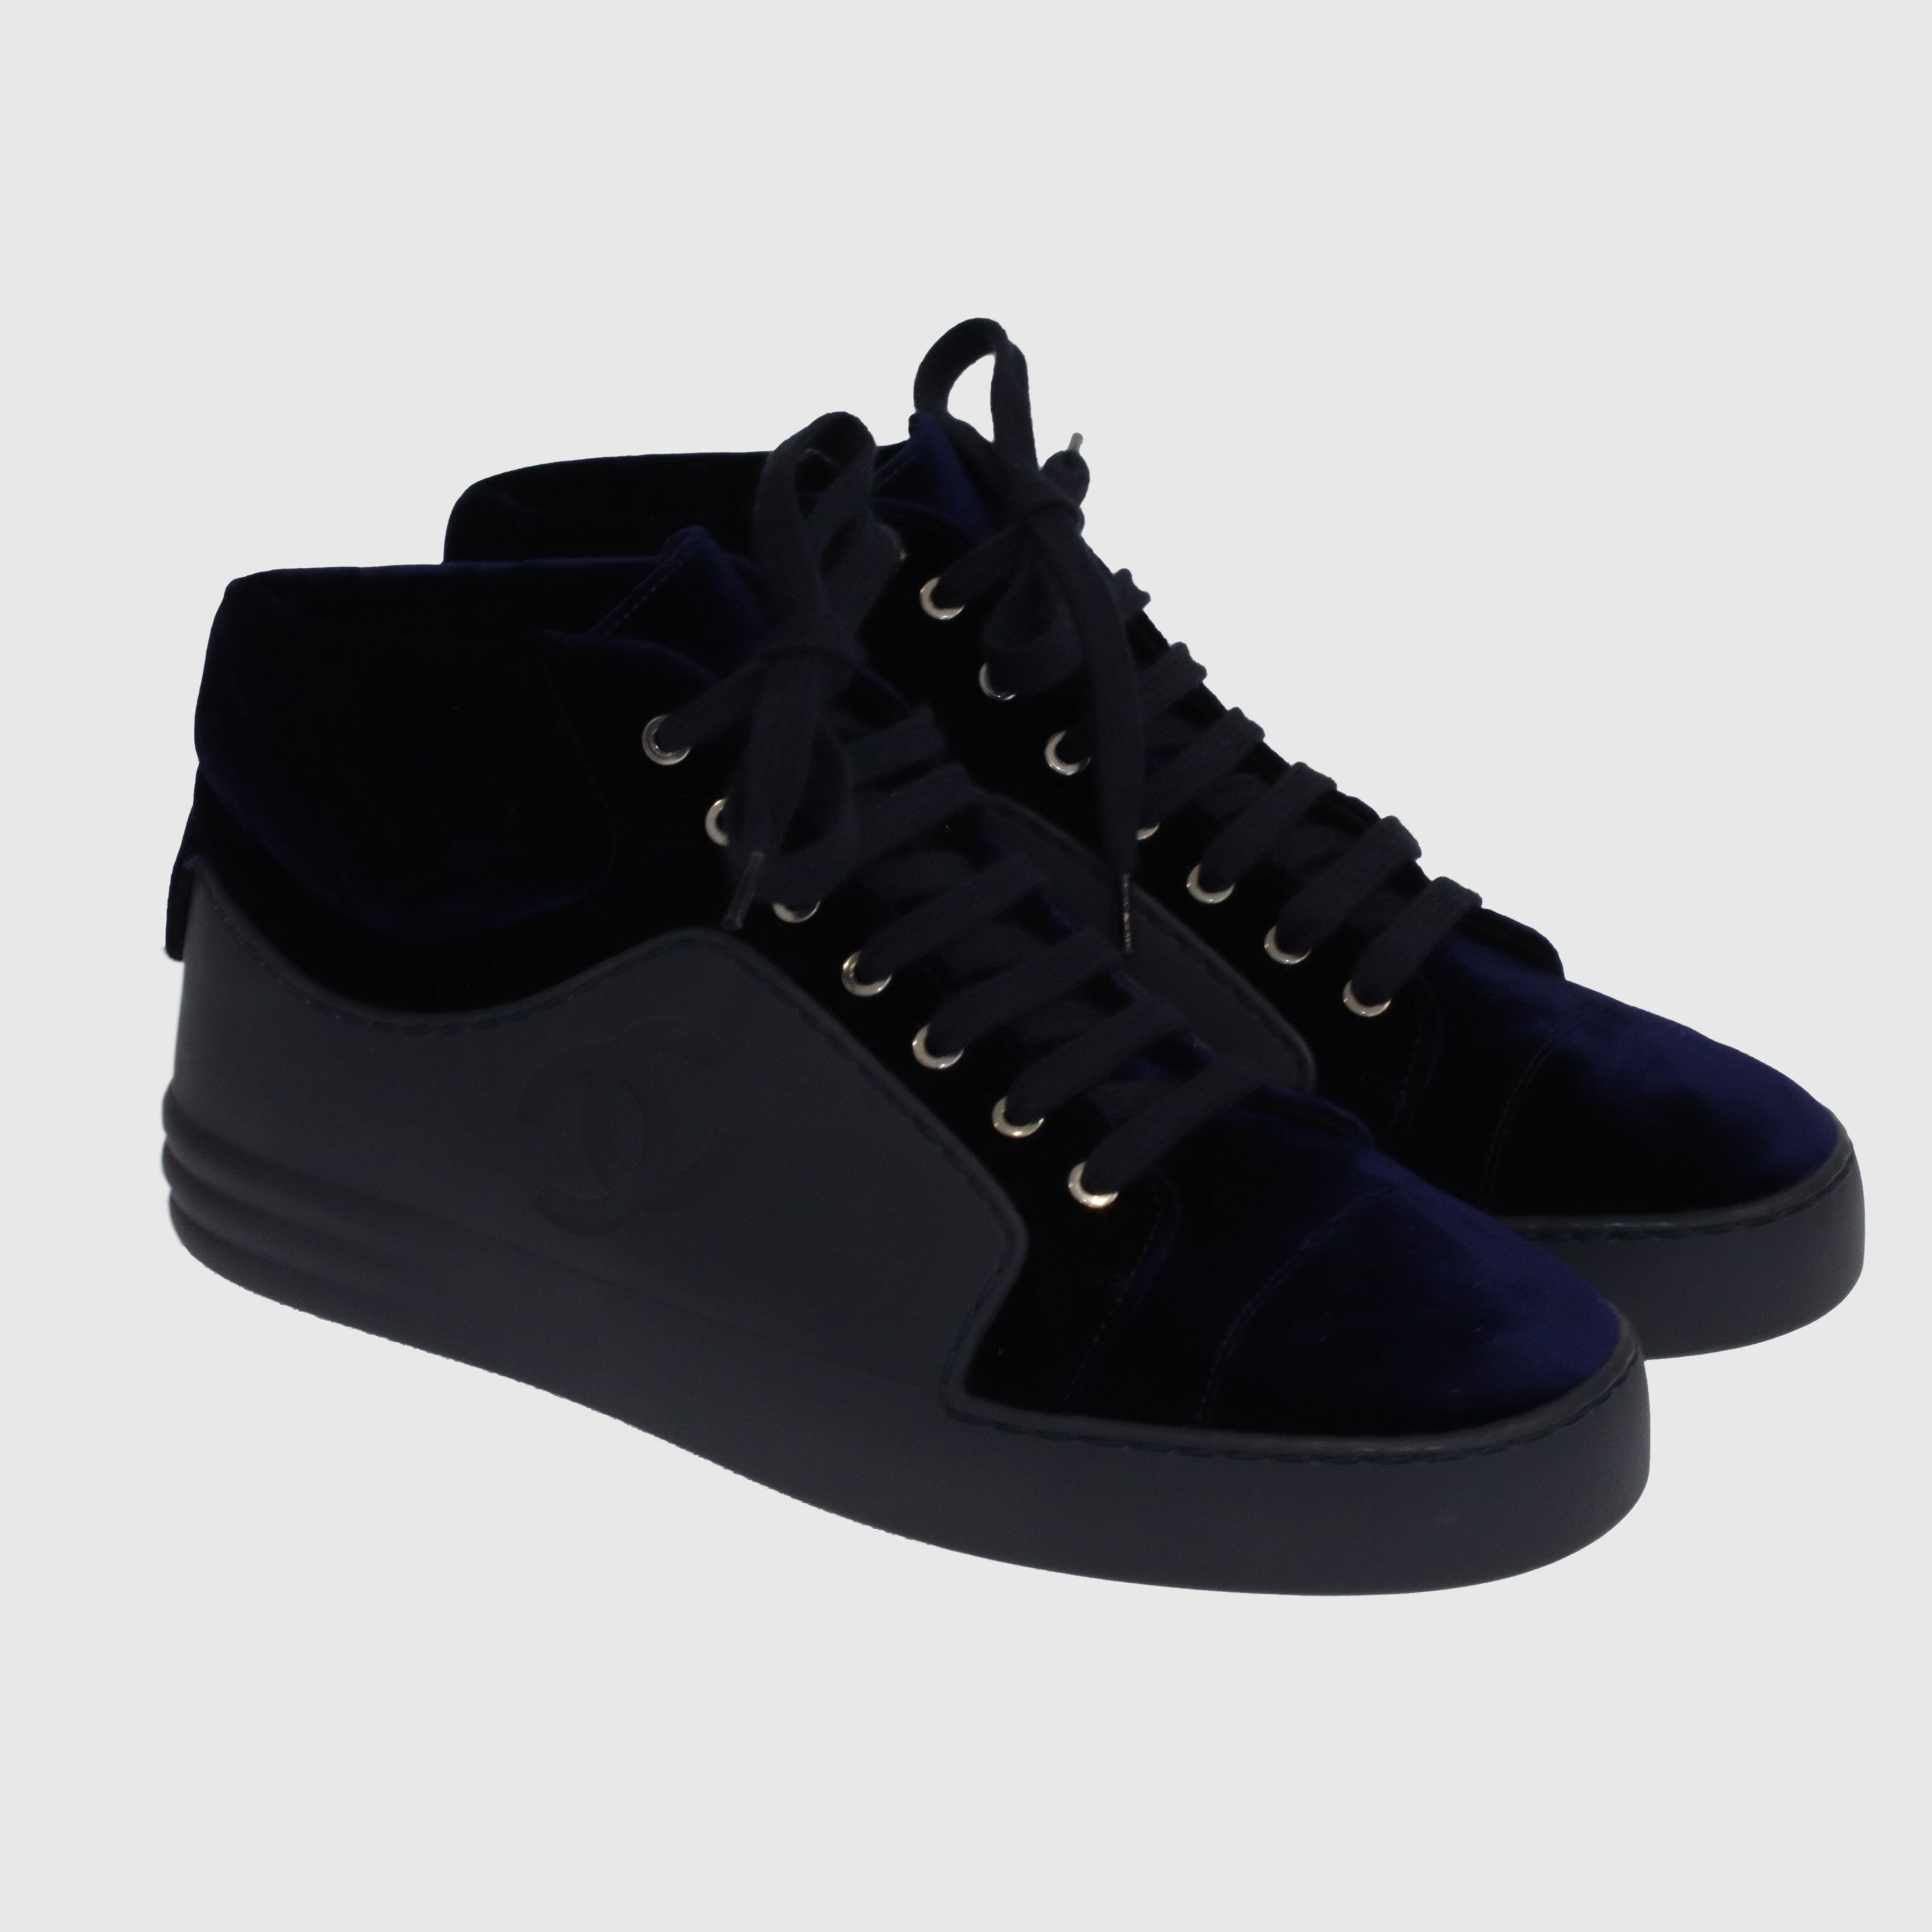 Navy Blue CC High Top Sneakers